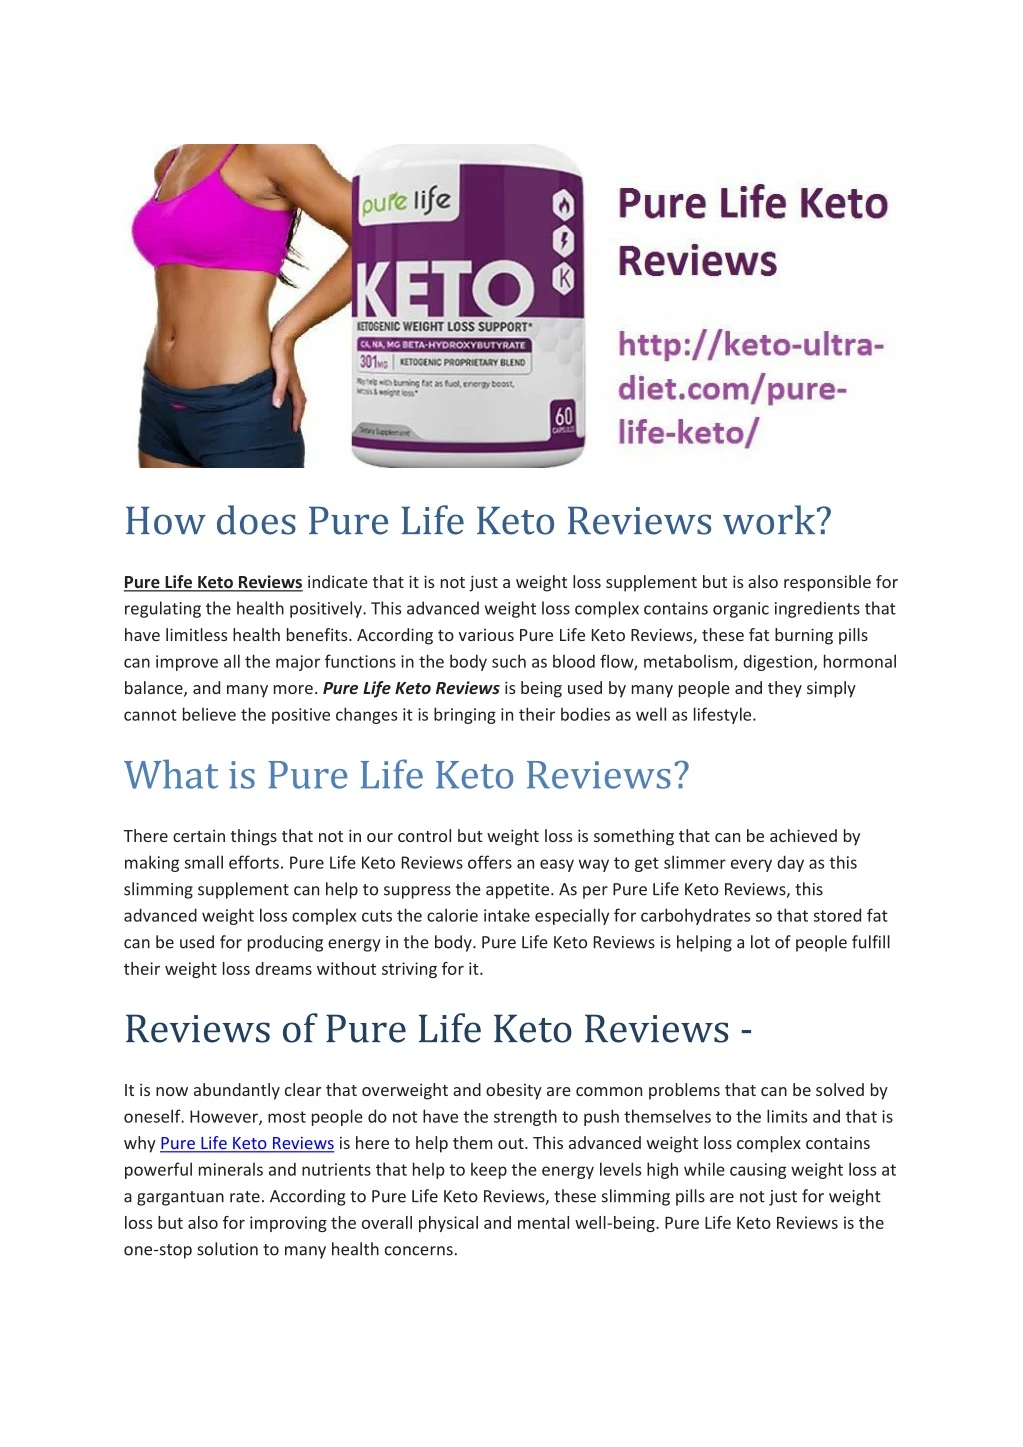 how does pure life keto reviews work n.